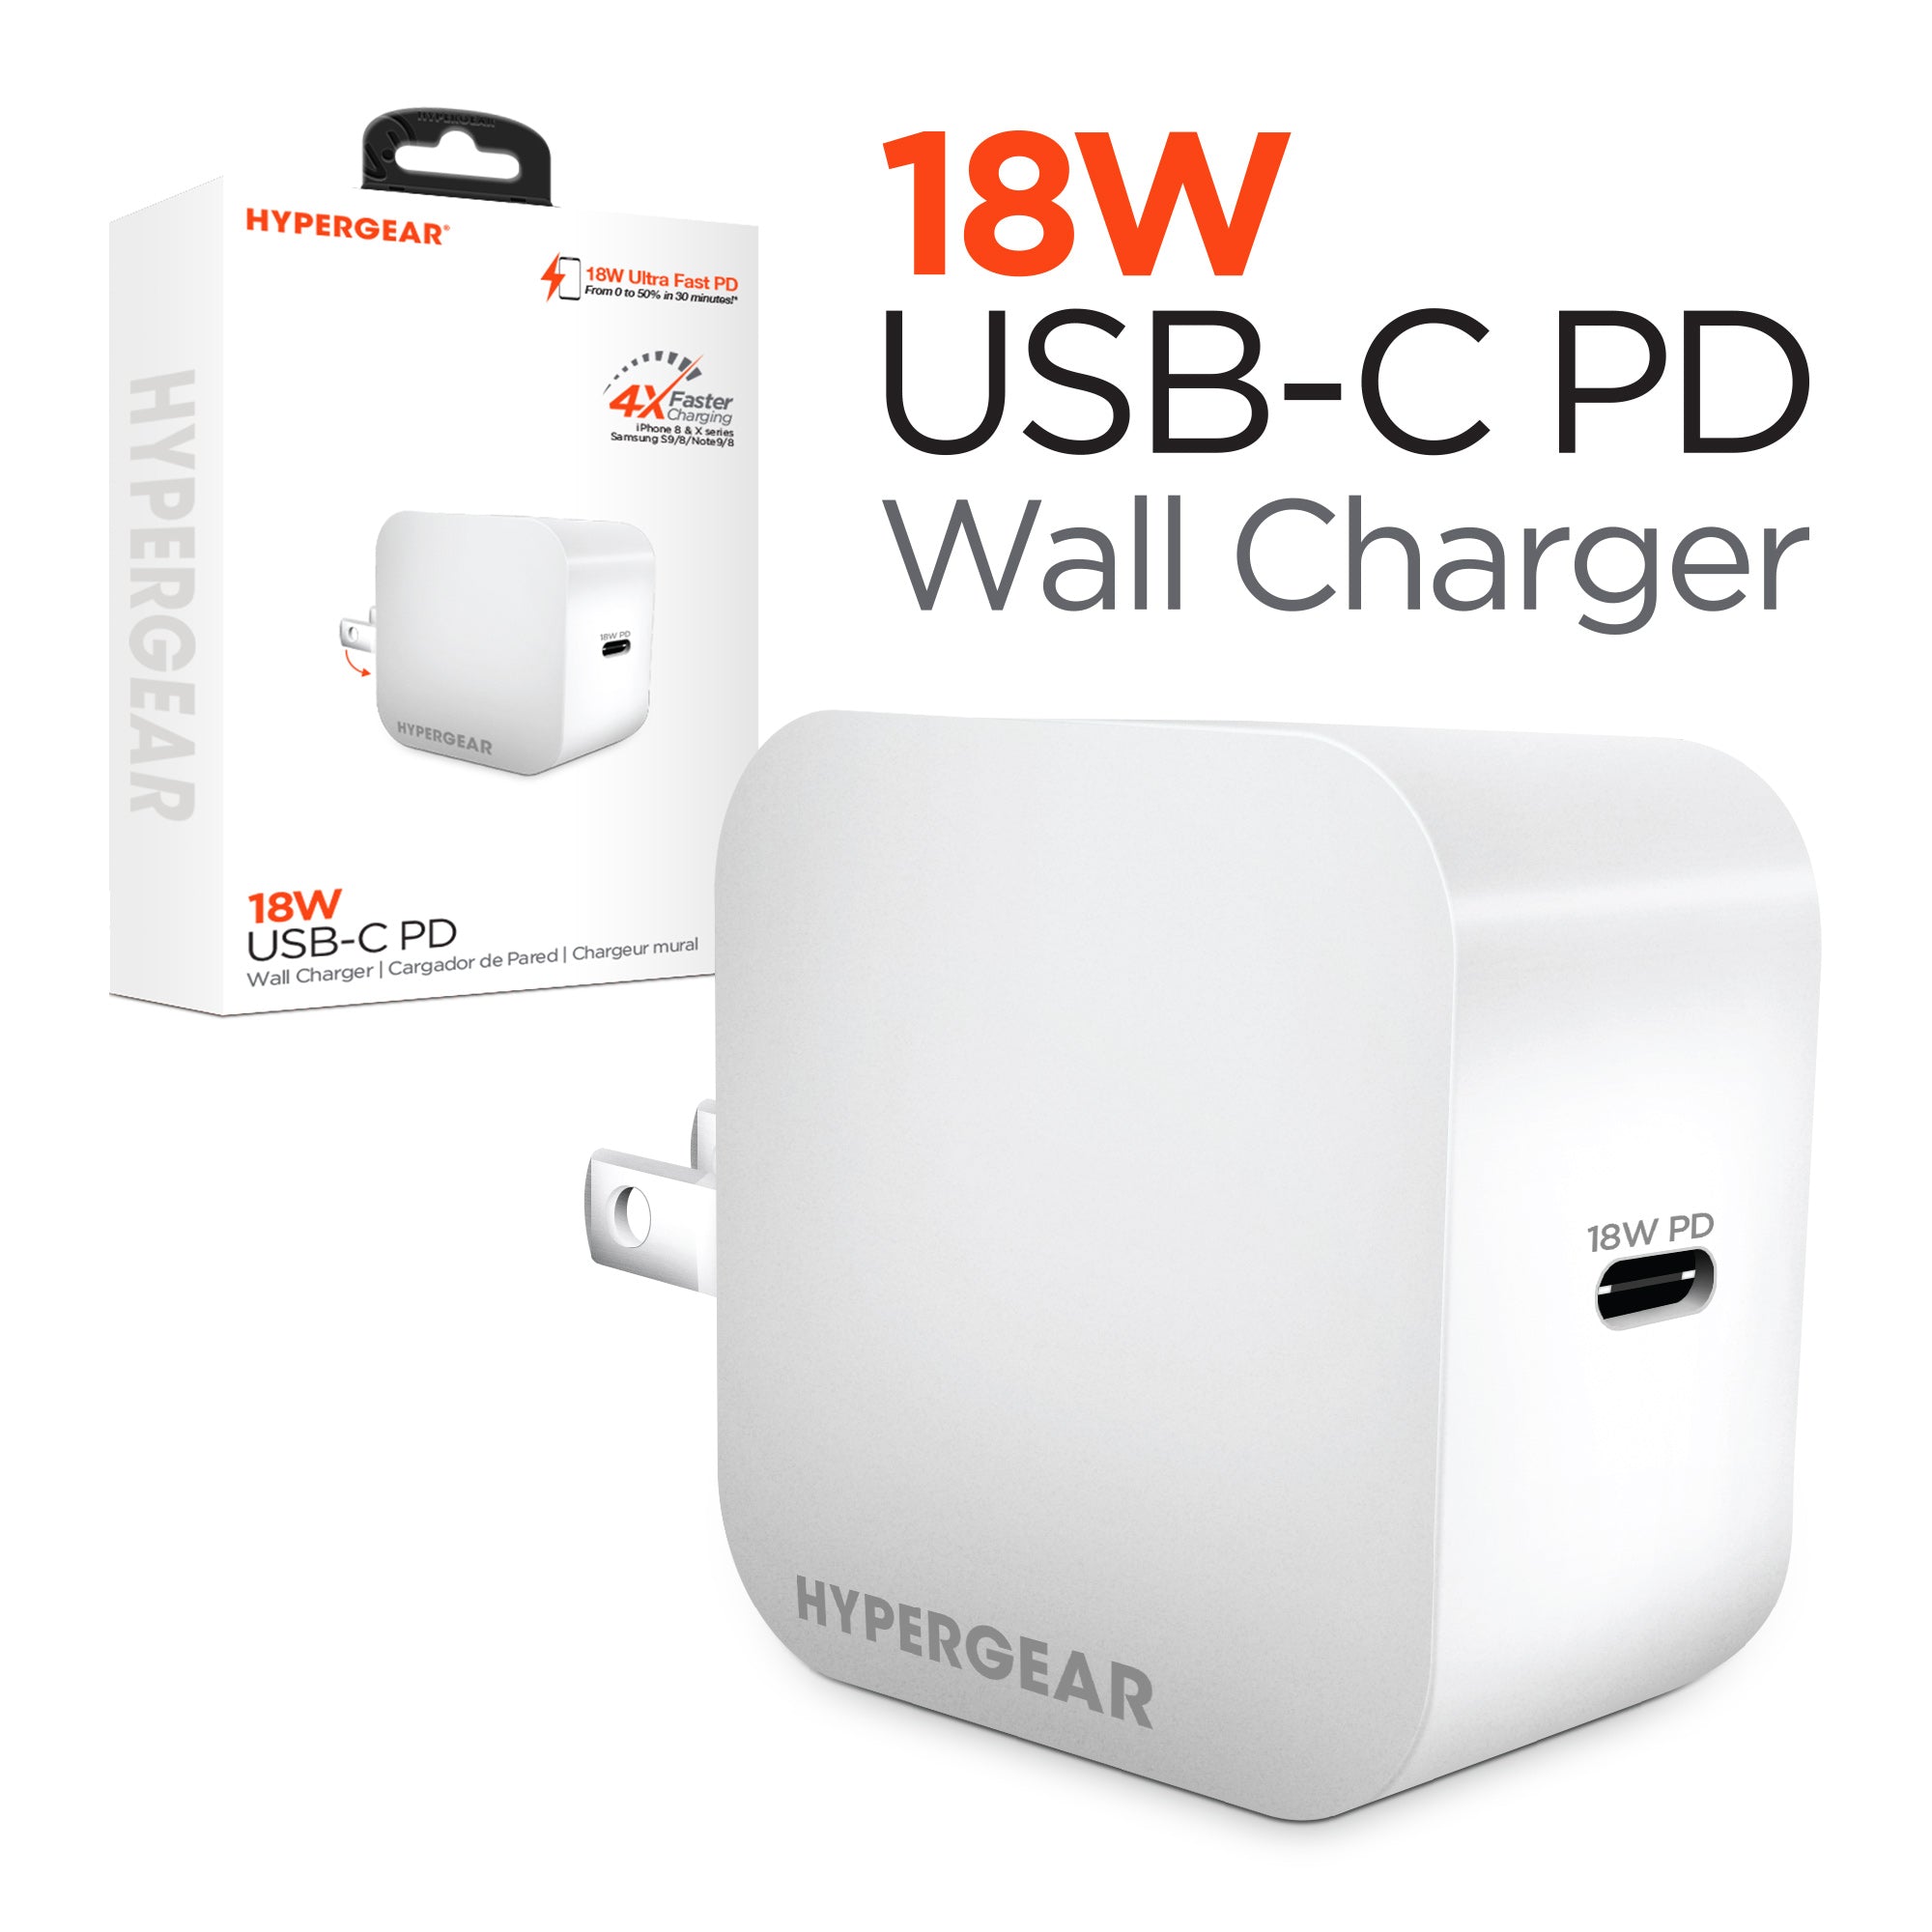 18W USB-C PD Wall Charger, USB Type-C Charger